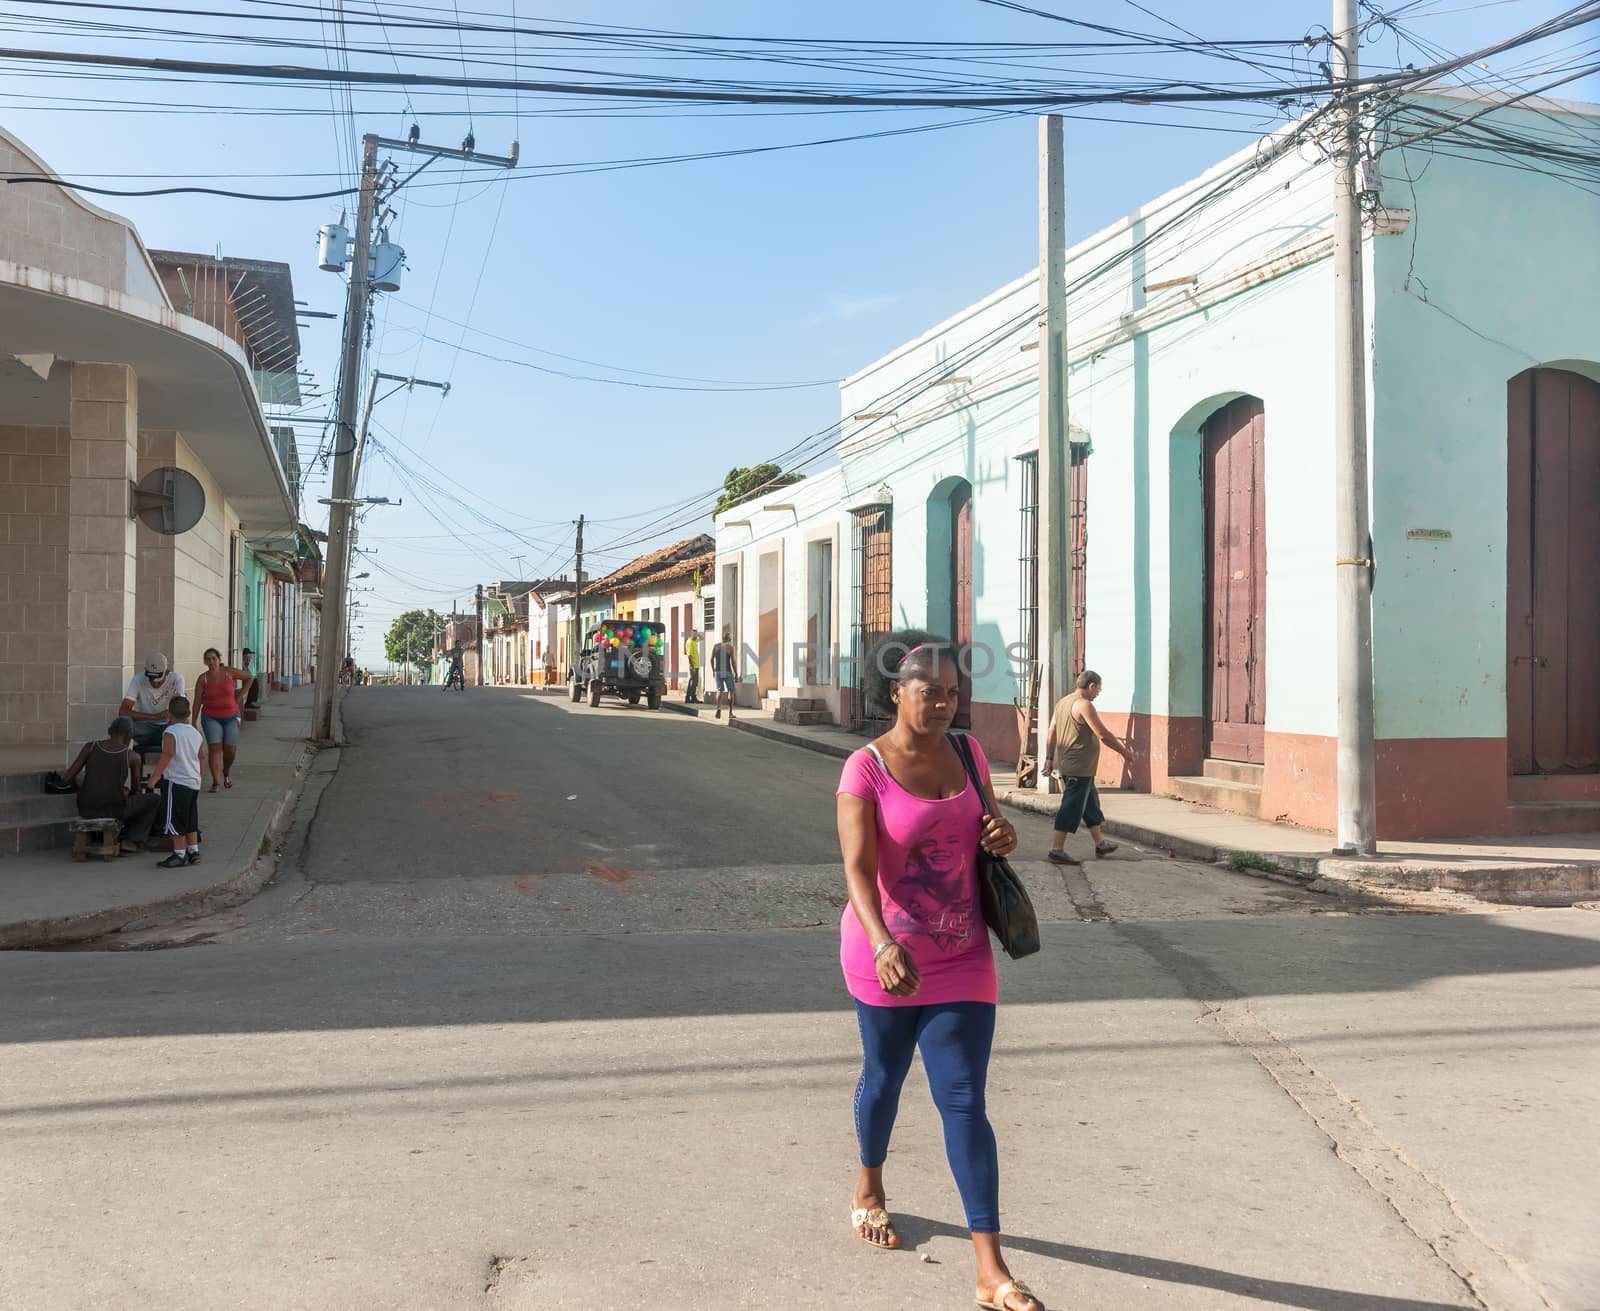 Trinidad, Cuba - July 2, 2012: Woman in pink top stands out as she walks along street lined by colonial style in Cuban town where others are sitting on corner